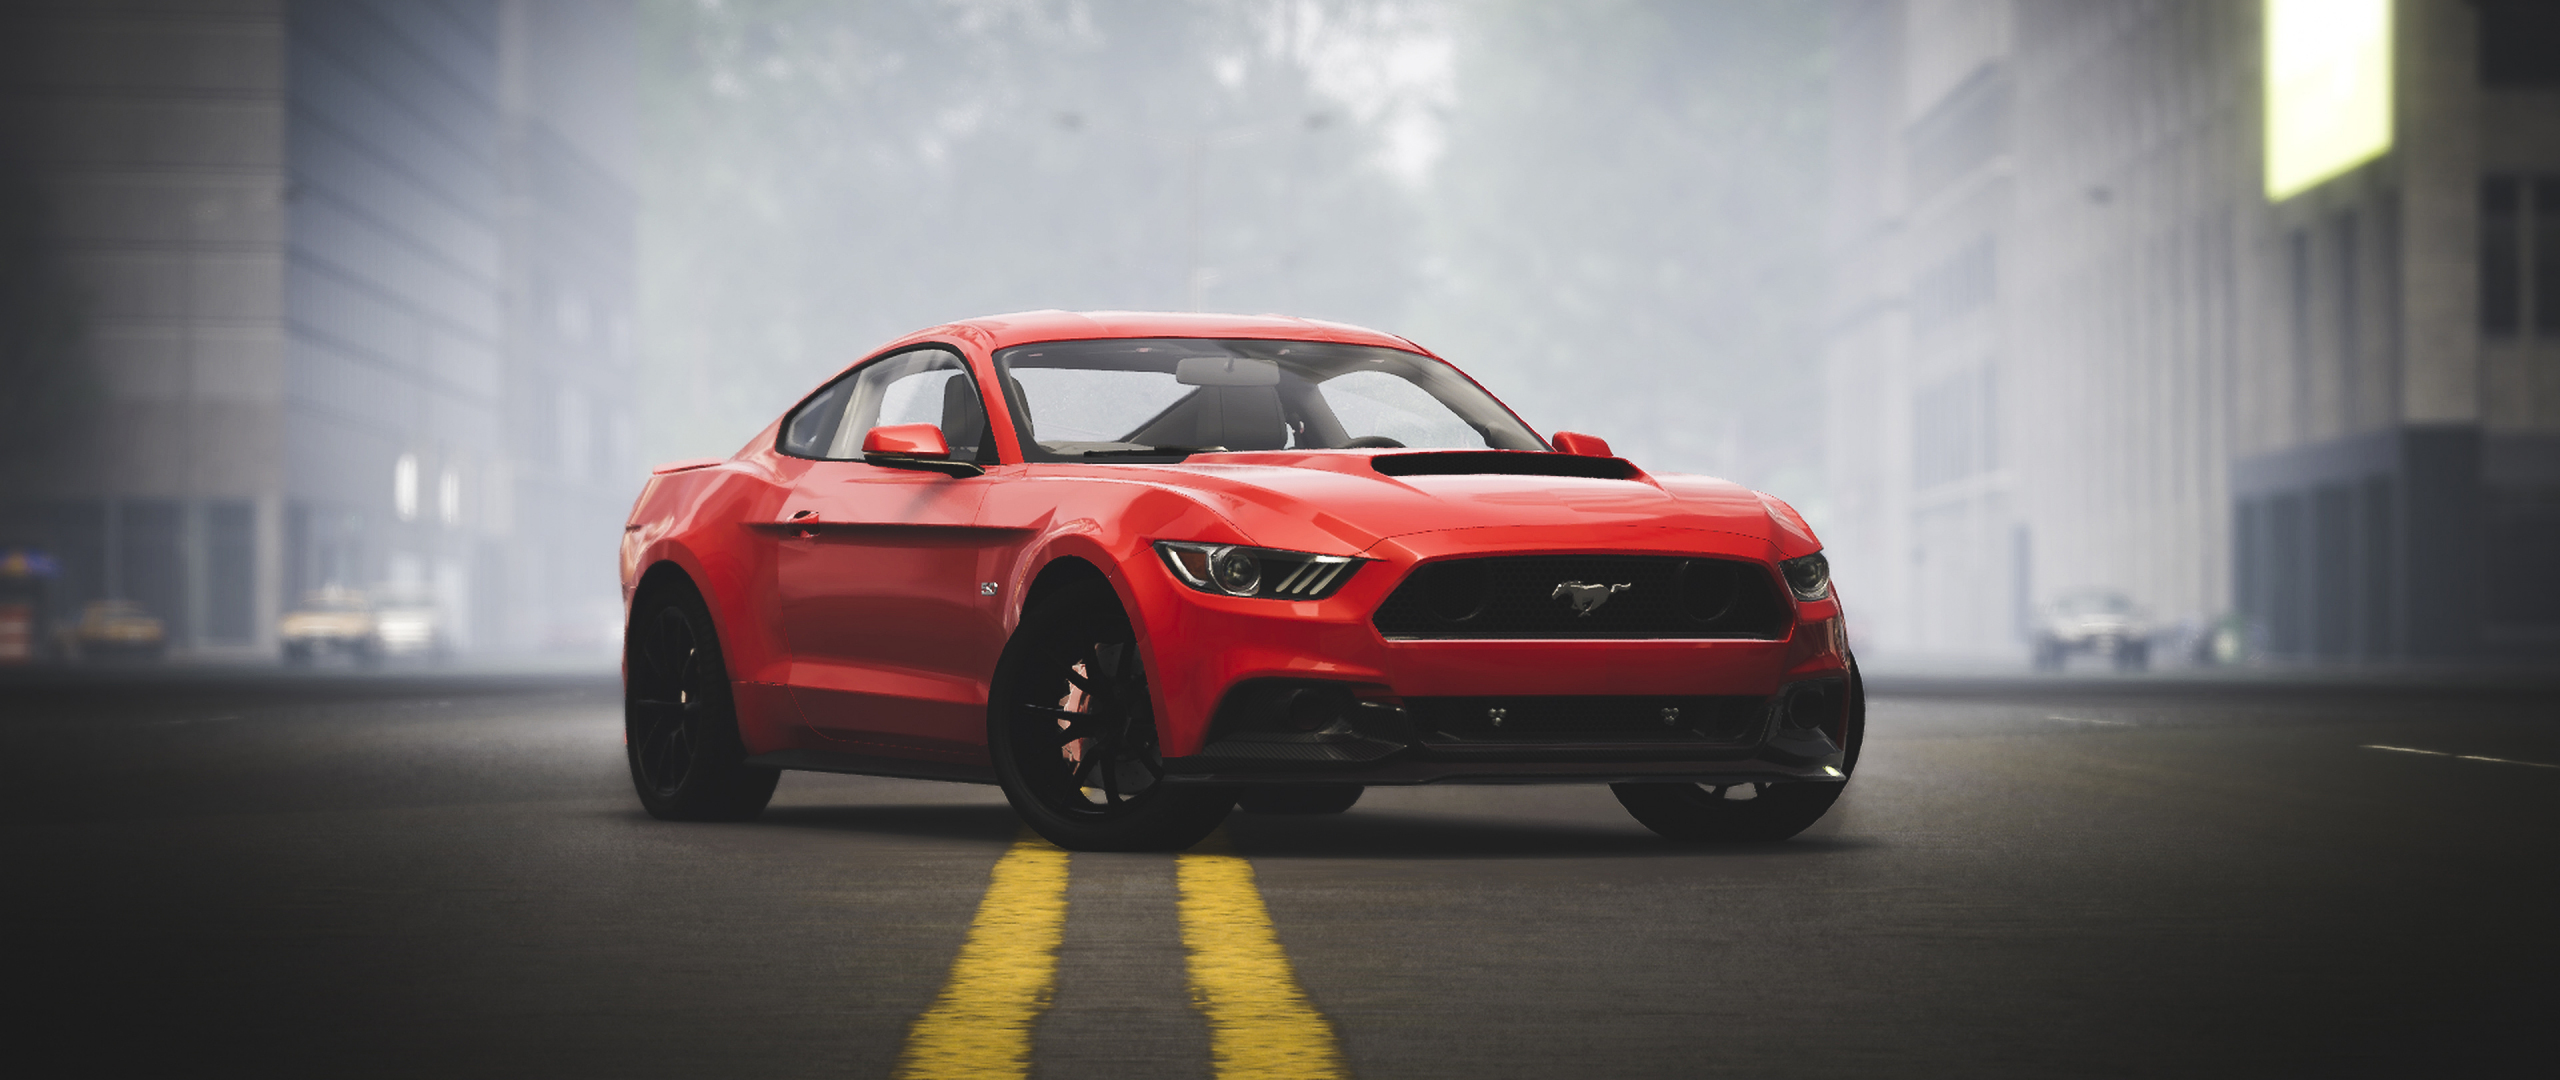 Download 2560x1080 Wallpaper Ford Mustang The Crew 2 Video Game Dual Wide Widescreen 2560x1080 Hd Image Background 19538